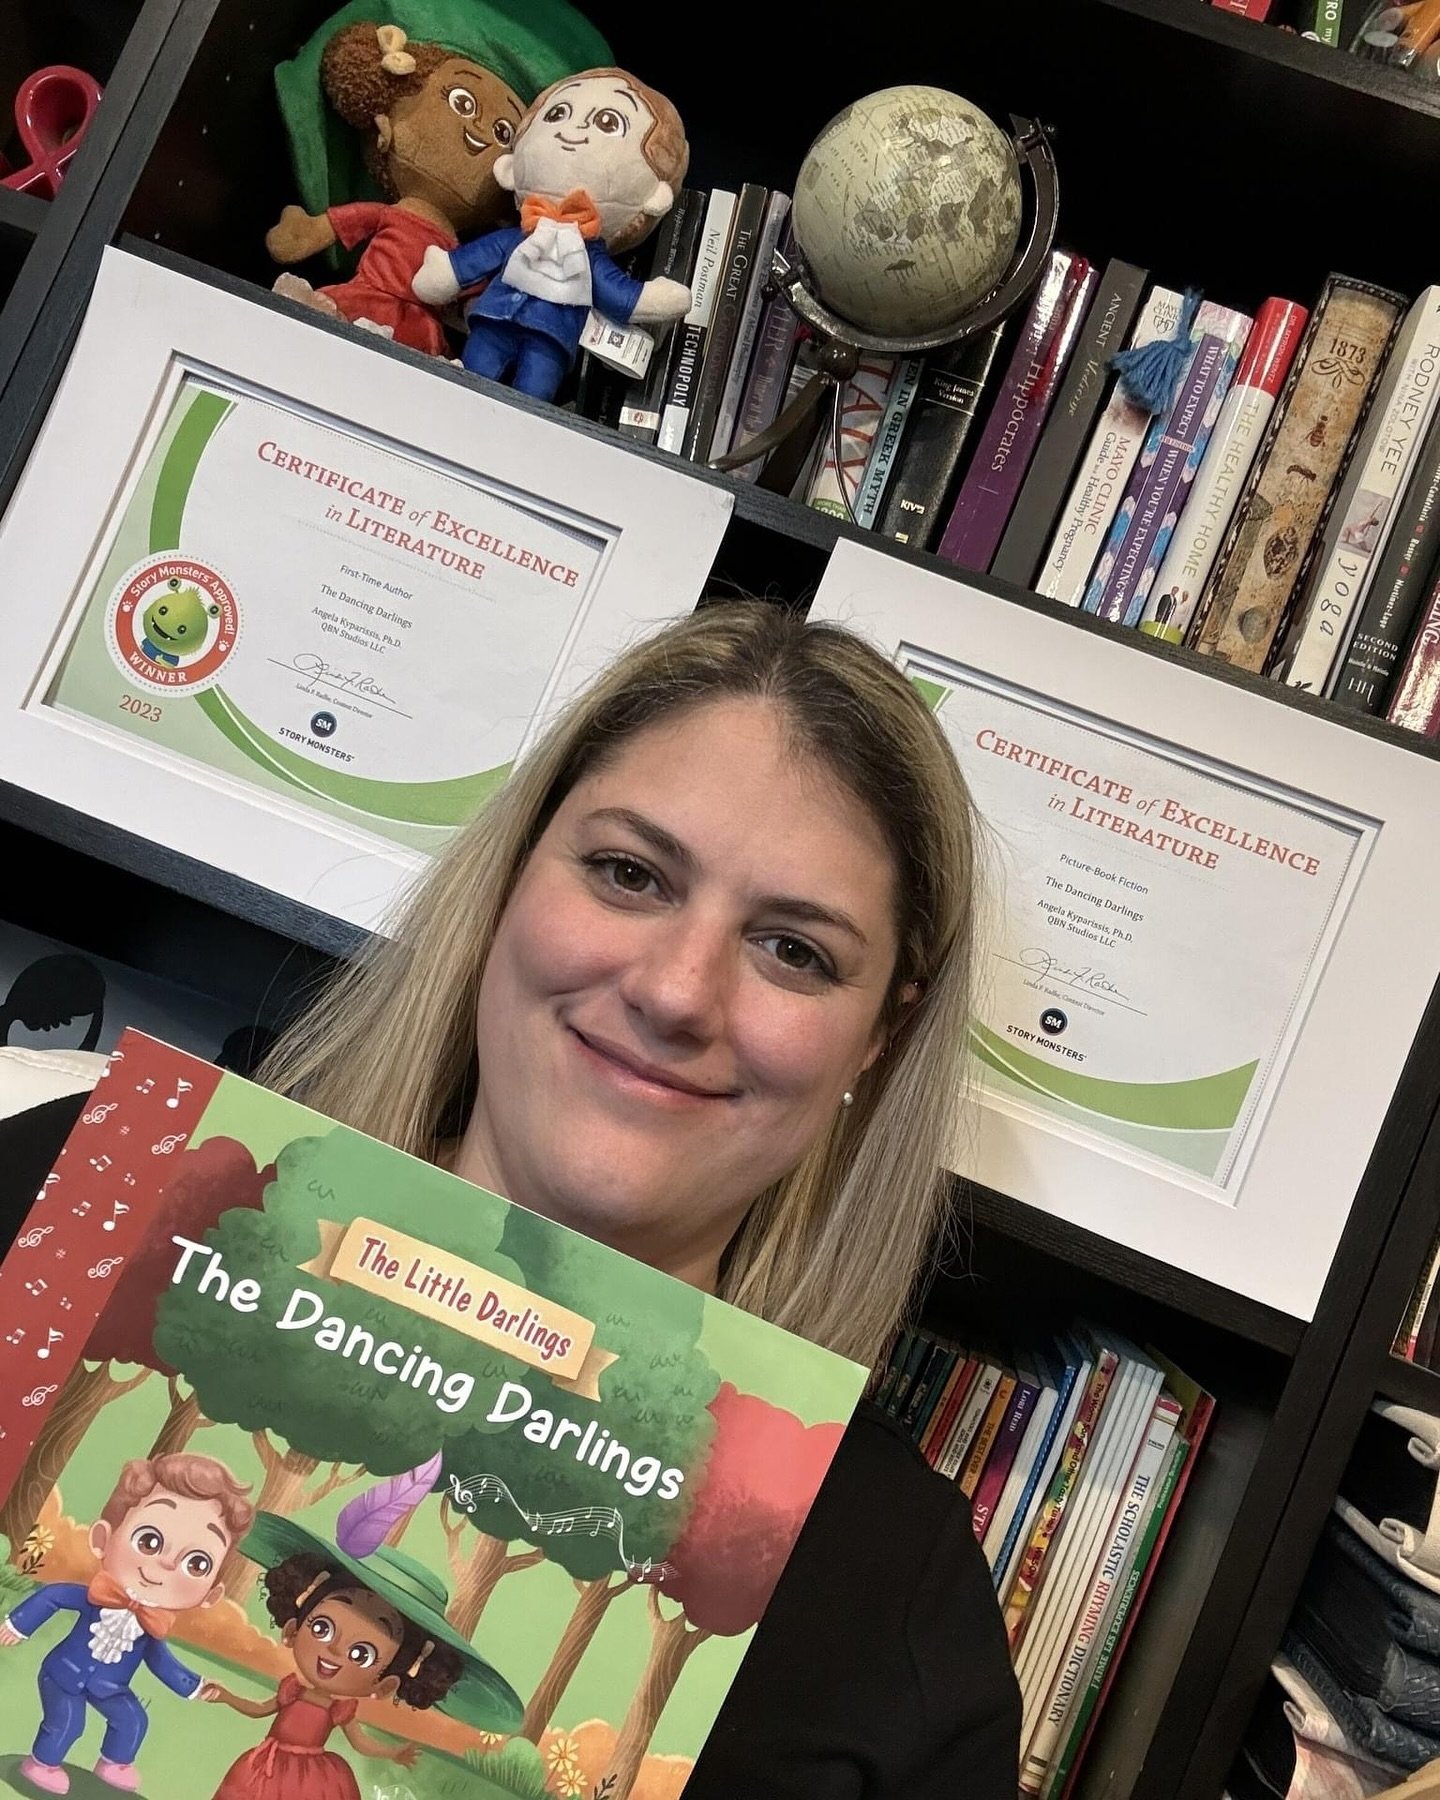 Congratulations to Angela Kyparissis, whose book, &ldquo;The Dancing Darlings&rdquo; earned the 2023 Story Monsters Seal of Approval in the Picture Books and New Author categories!

StoryMonstersBookAwards.com